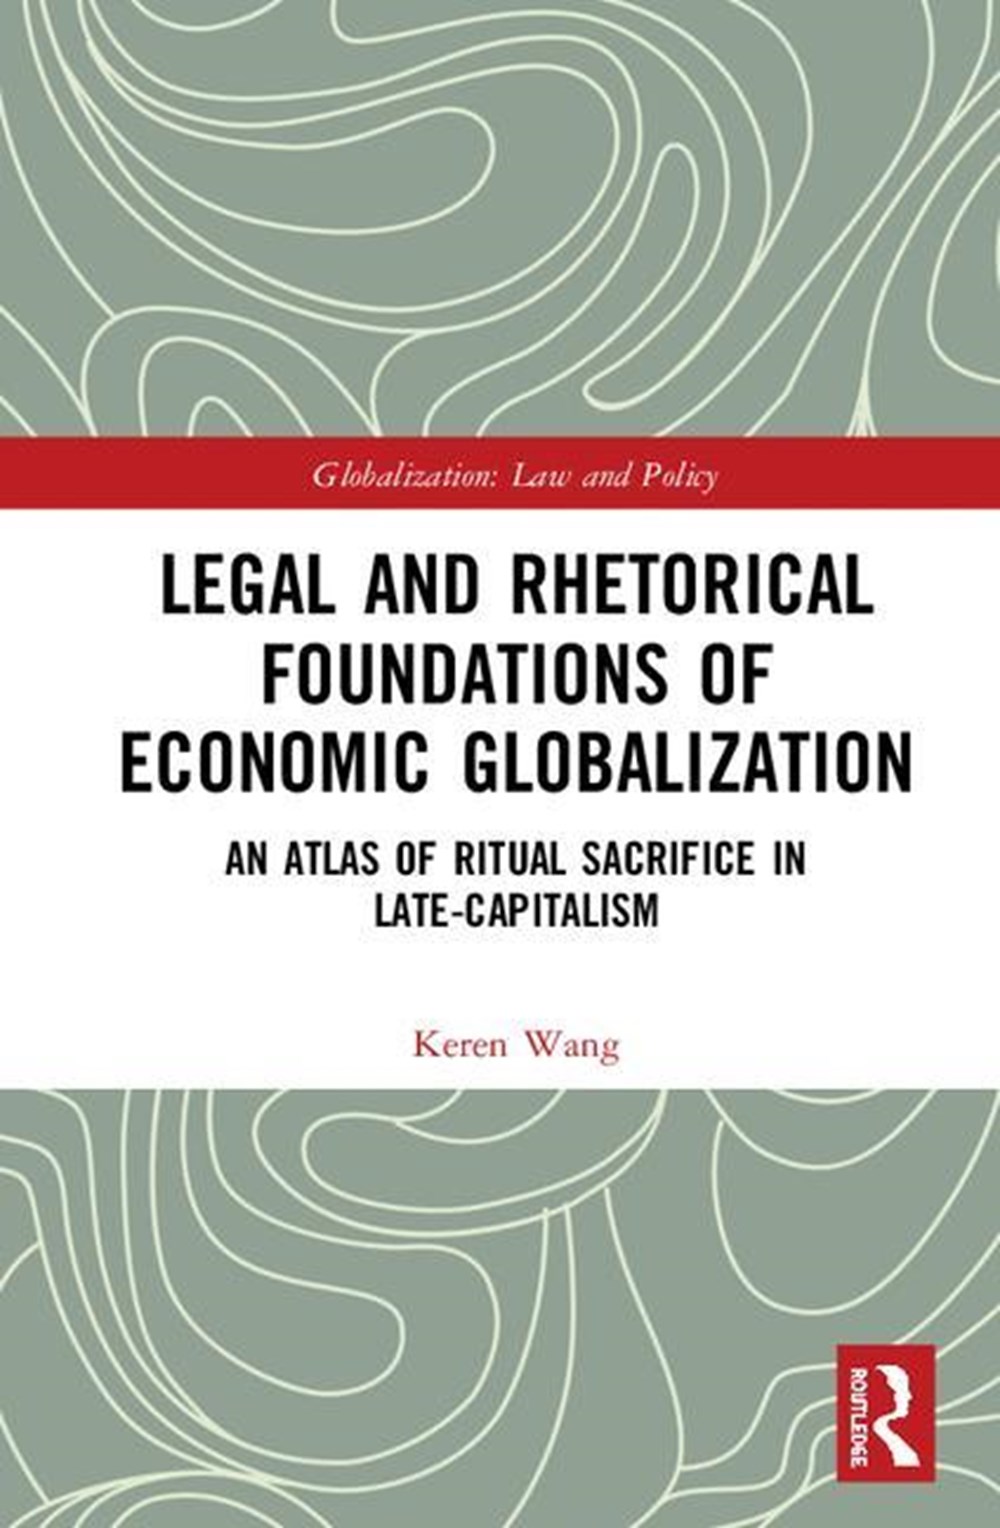 Legal and Rhetorical Foundations of Economic Globalization: An Atlas of Ritual Sacrifice in Late-Cap